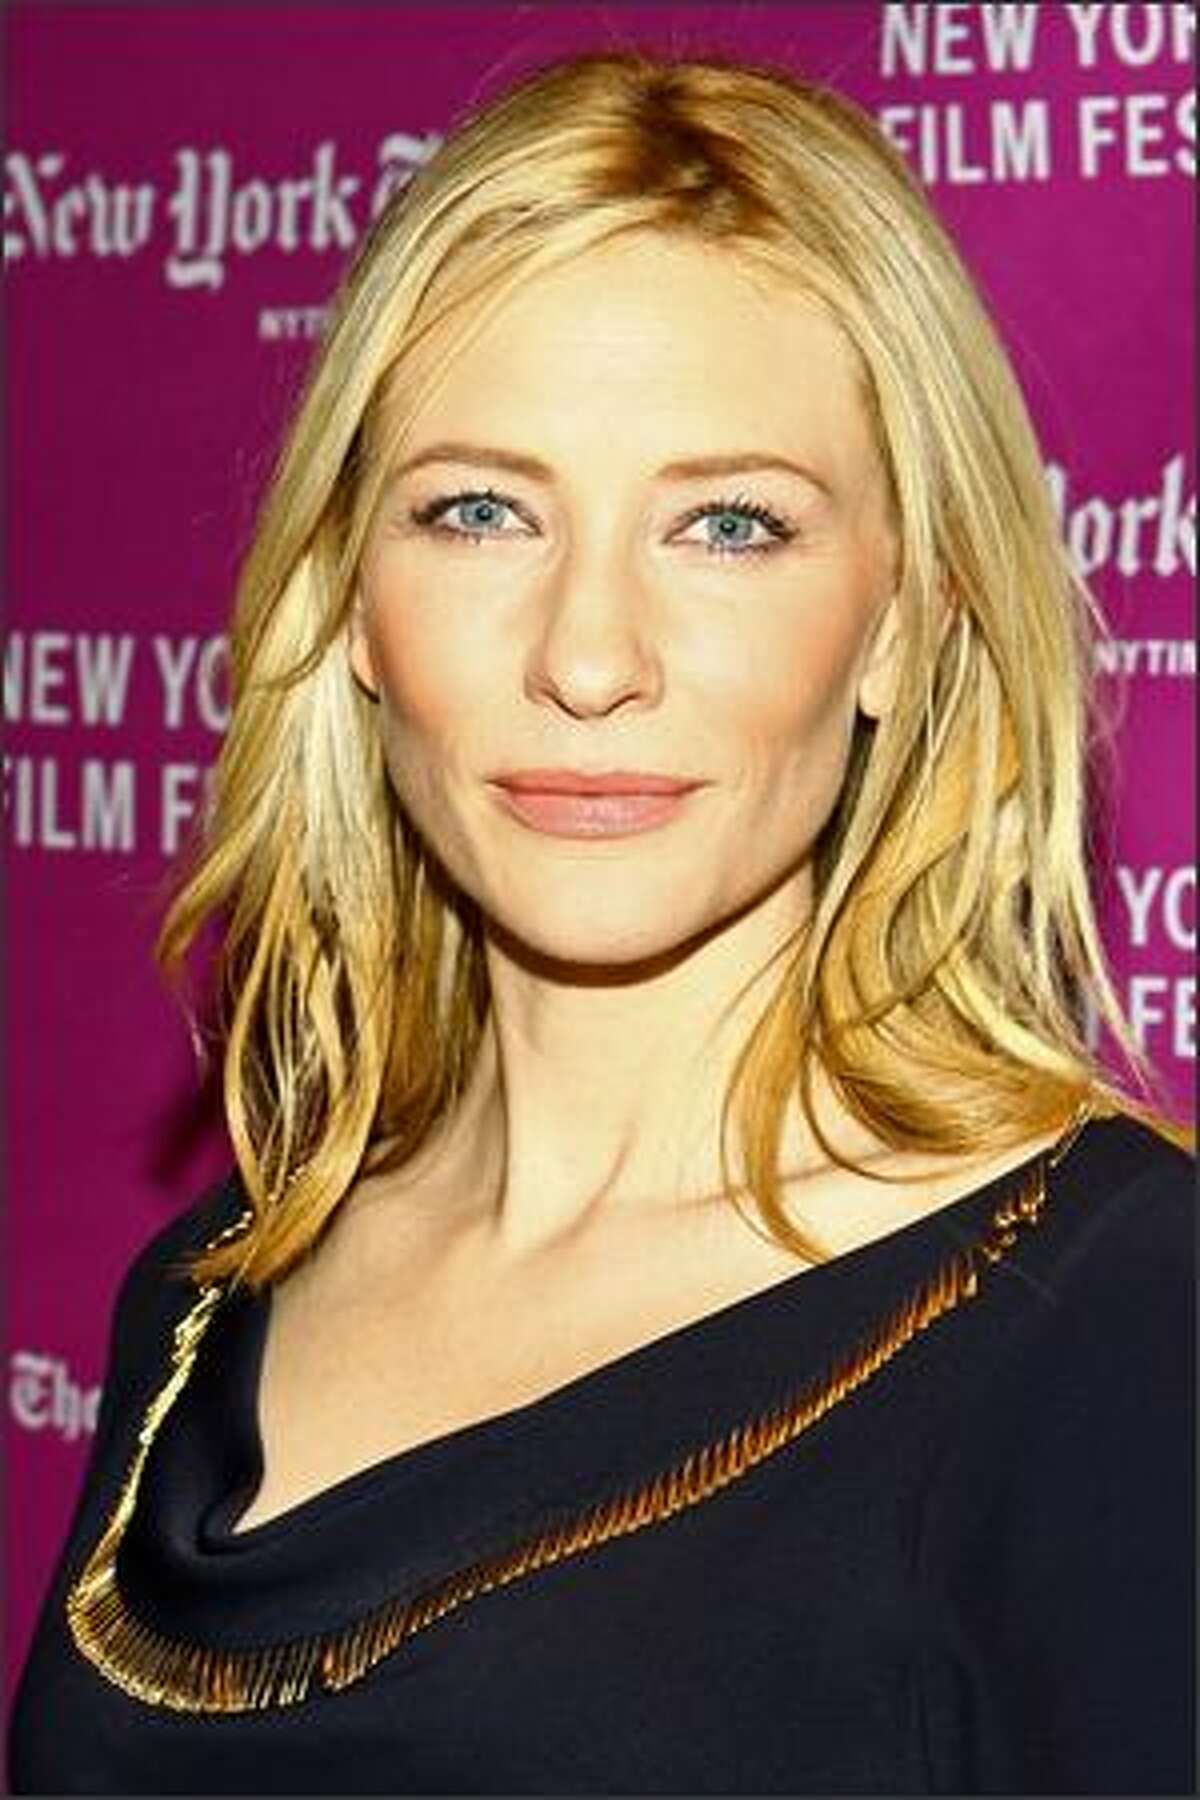 Actress Cate Blanchett attends the New York Film Festival screening of "I'm Not There" at Frederick P. Rose Hall October 4, 2007 in New York City.